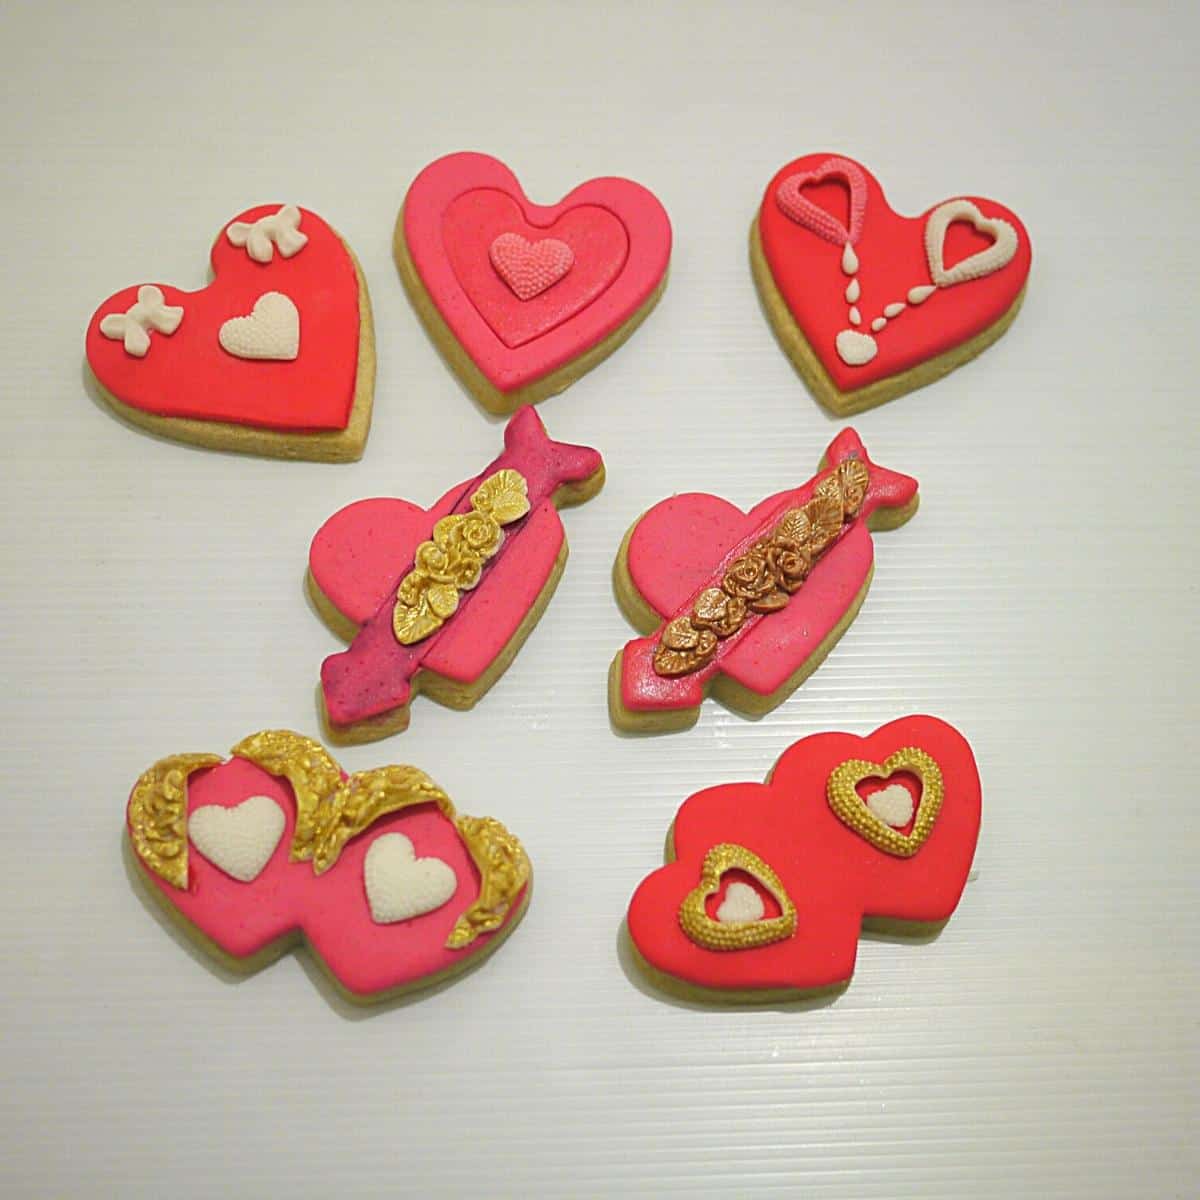 Rollling Pin for Cake Bakery Heart Love Pattern Fondant Perfect Valentine Gift and Birthday Present for Girls Cookies Dough Decorating Roller for Pastry 